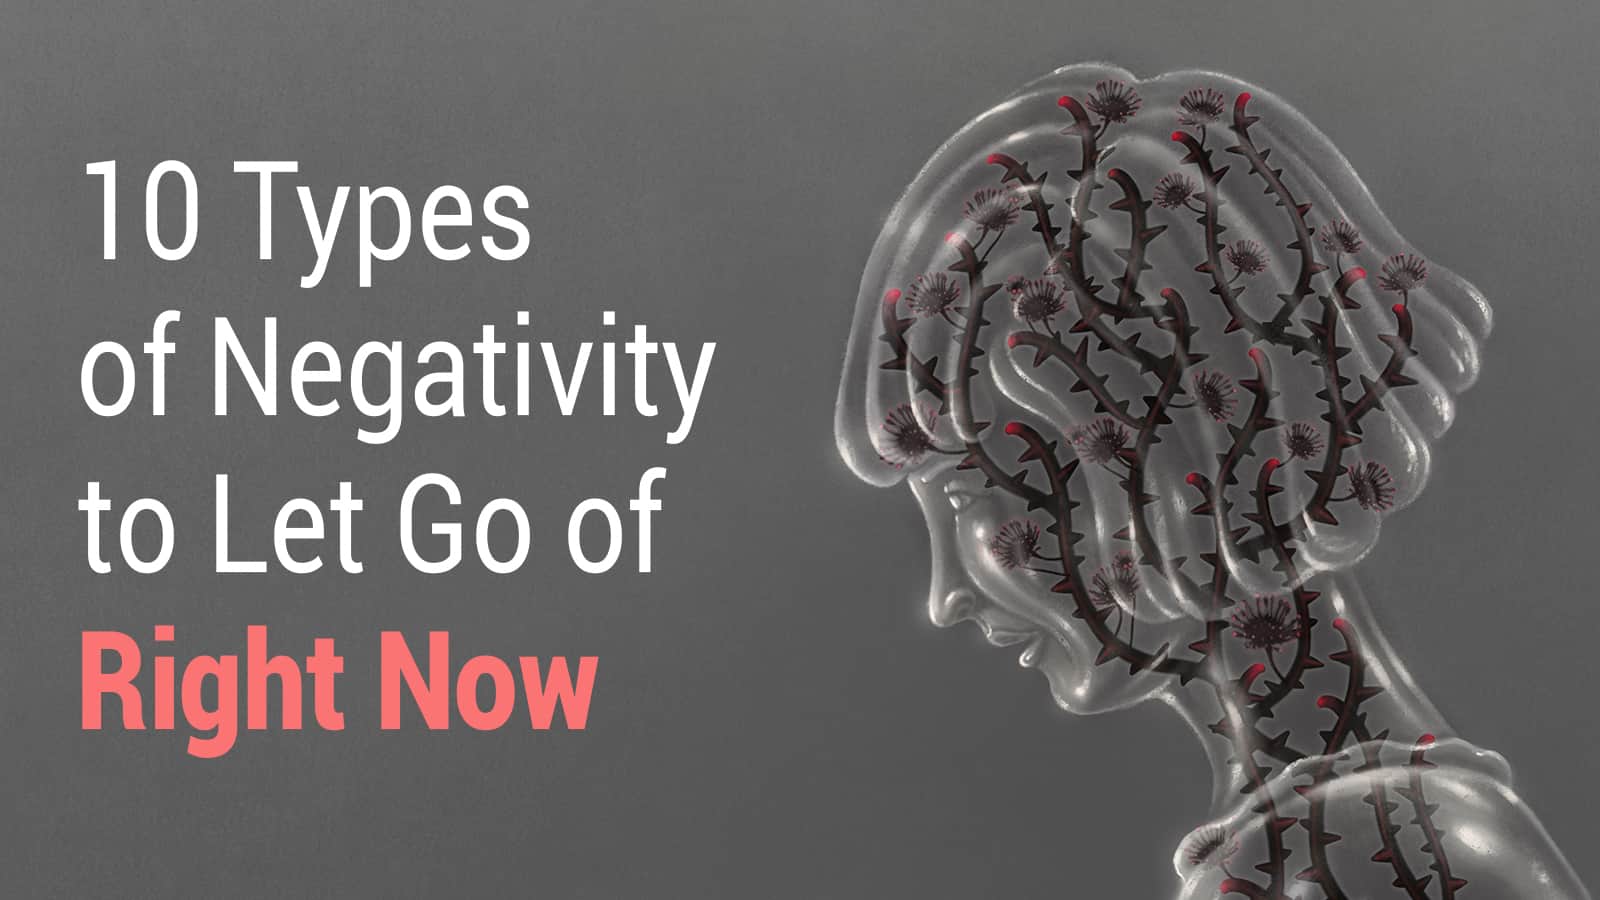 10 Types of Negativity to Let Go of Right Now